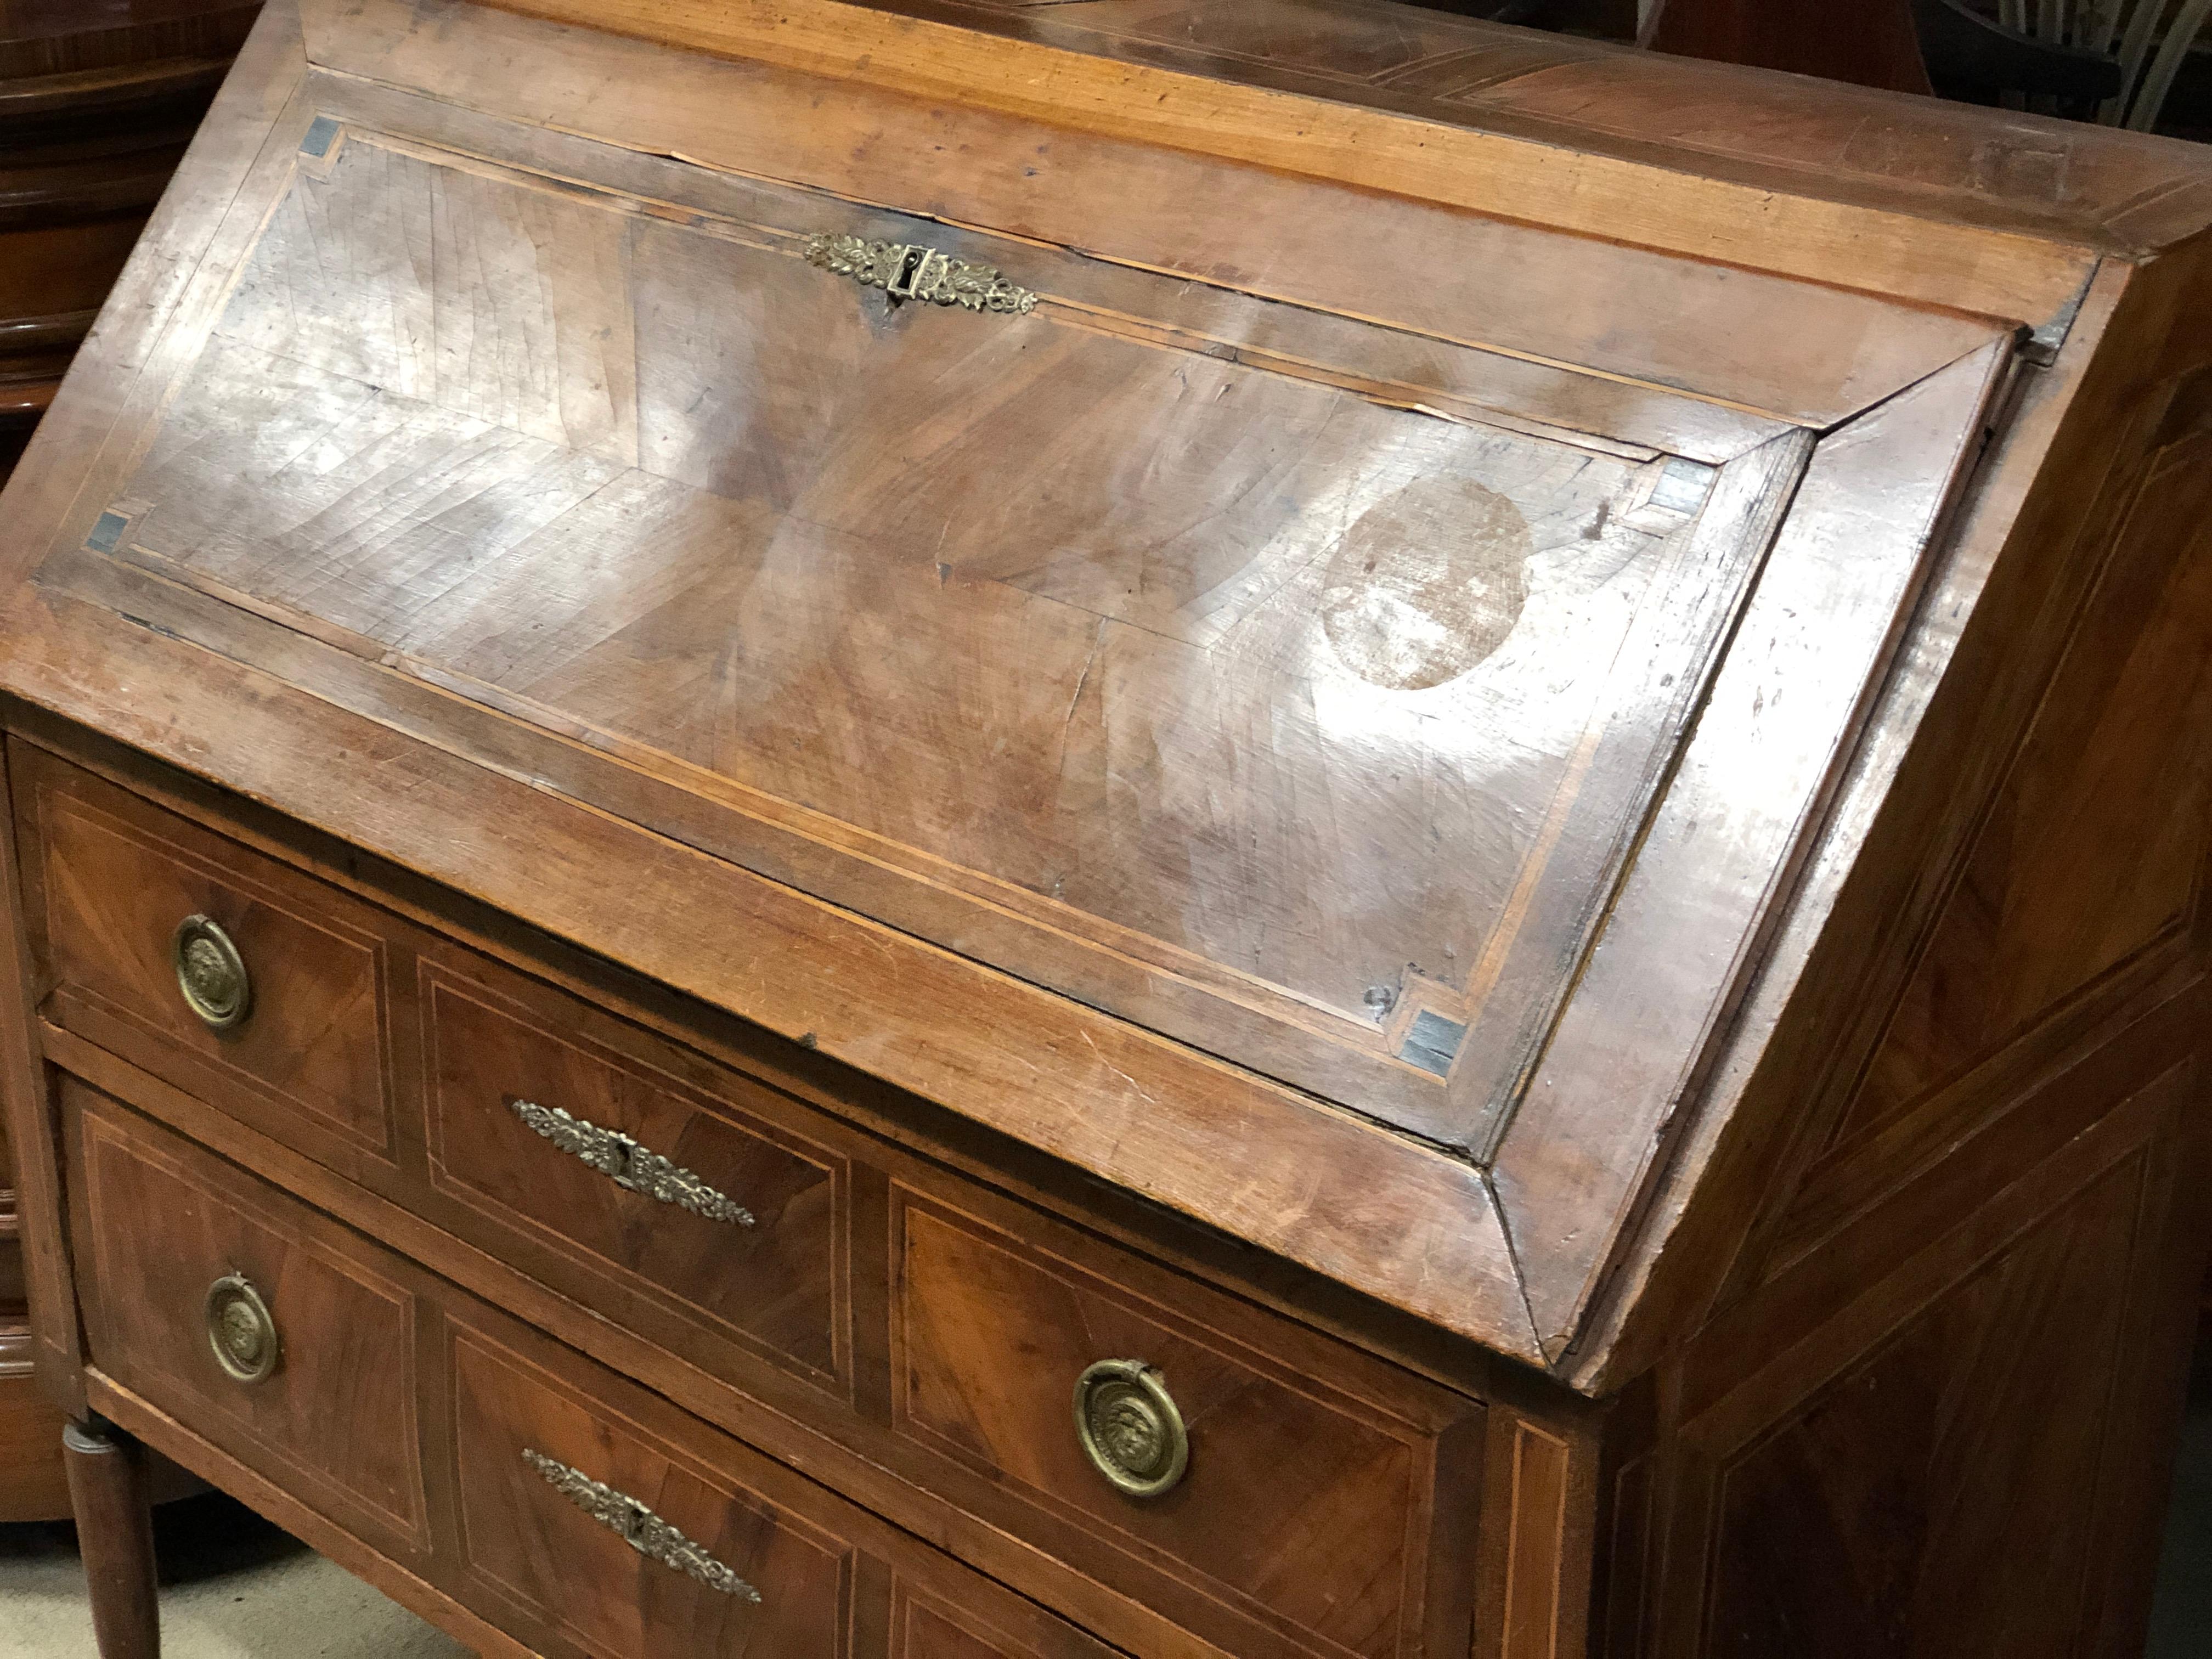 Fantastic French secretaire, Haute-Savoie, Louis XVI period, circa 1790-1799, in walnut wood with inlays in fruit wood. To be restored and a lock is missing. Of excellent proportions, the maximum overall dimensions are 92 cm. In the Mobile you can